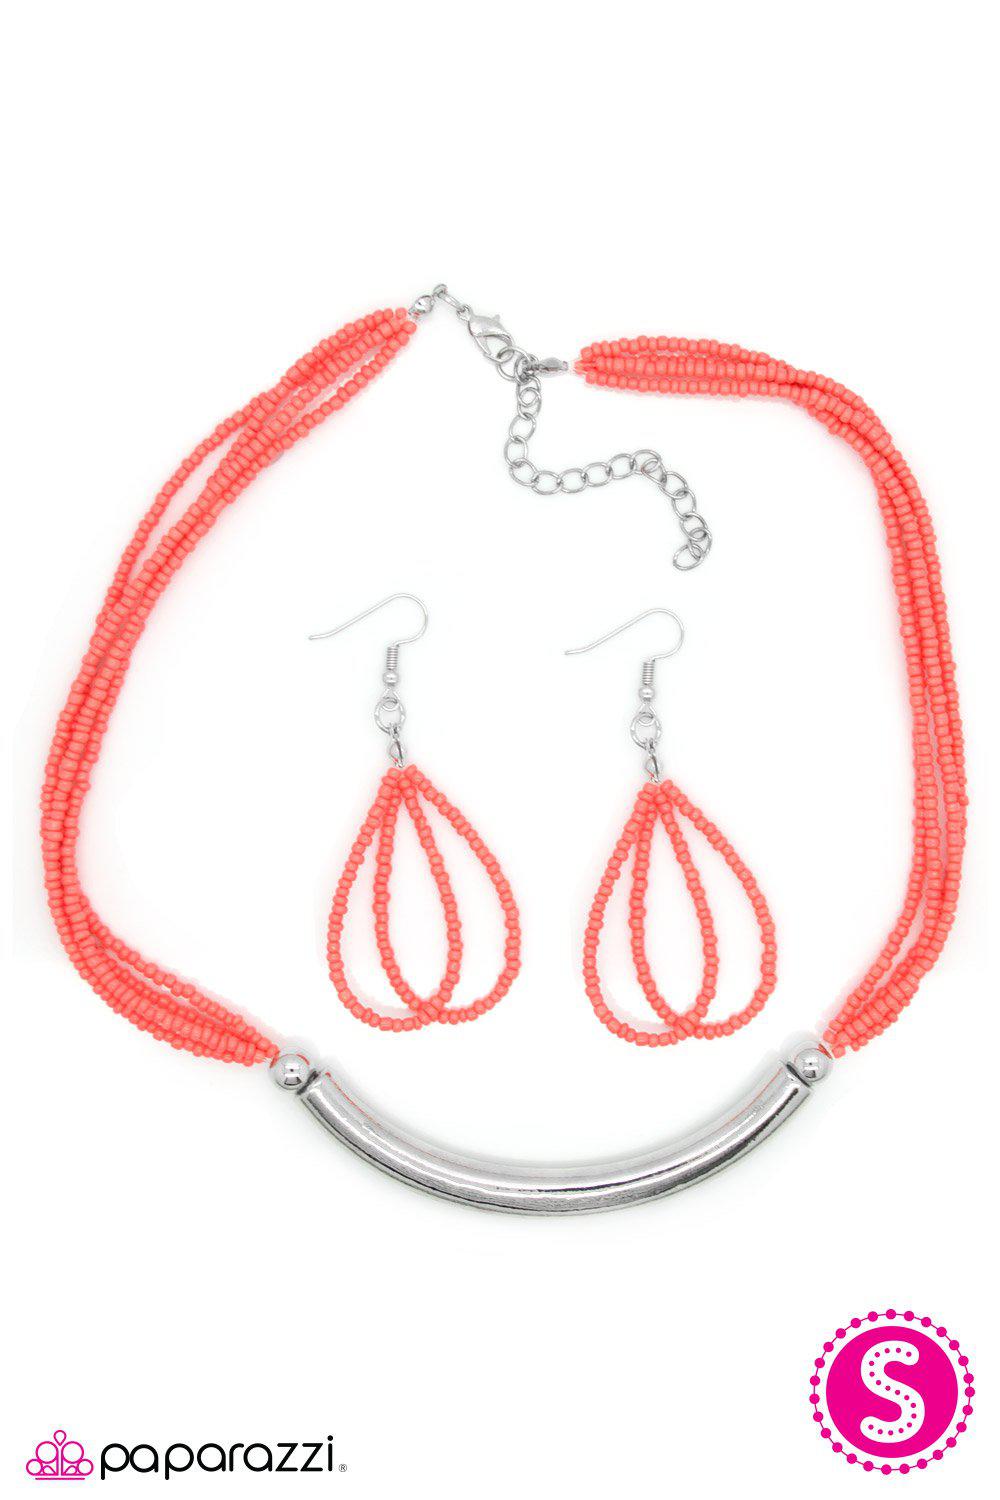 The Texan Coral Seed Bead Necklace - Paparazzi Accessories - lightbox -CarasShop.com - $5 Jewelry by Cara Jewels